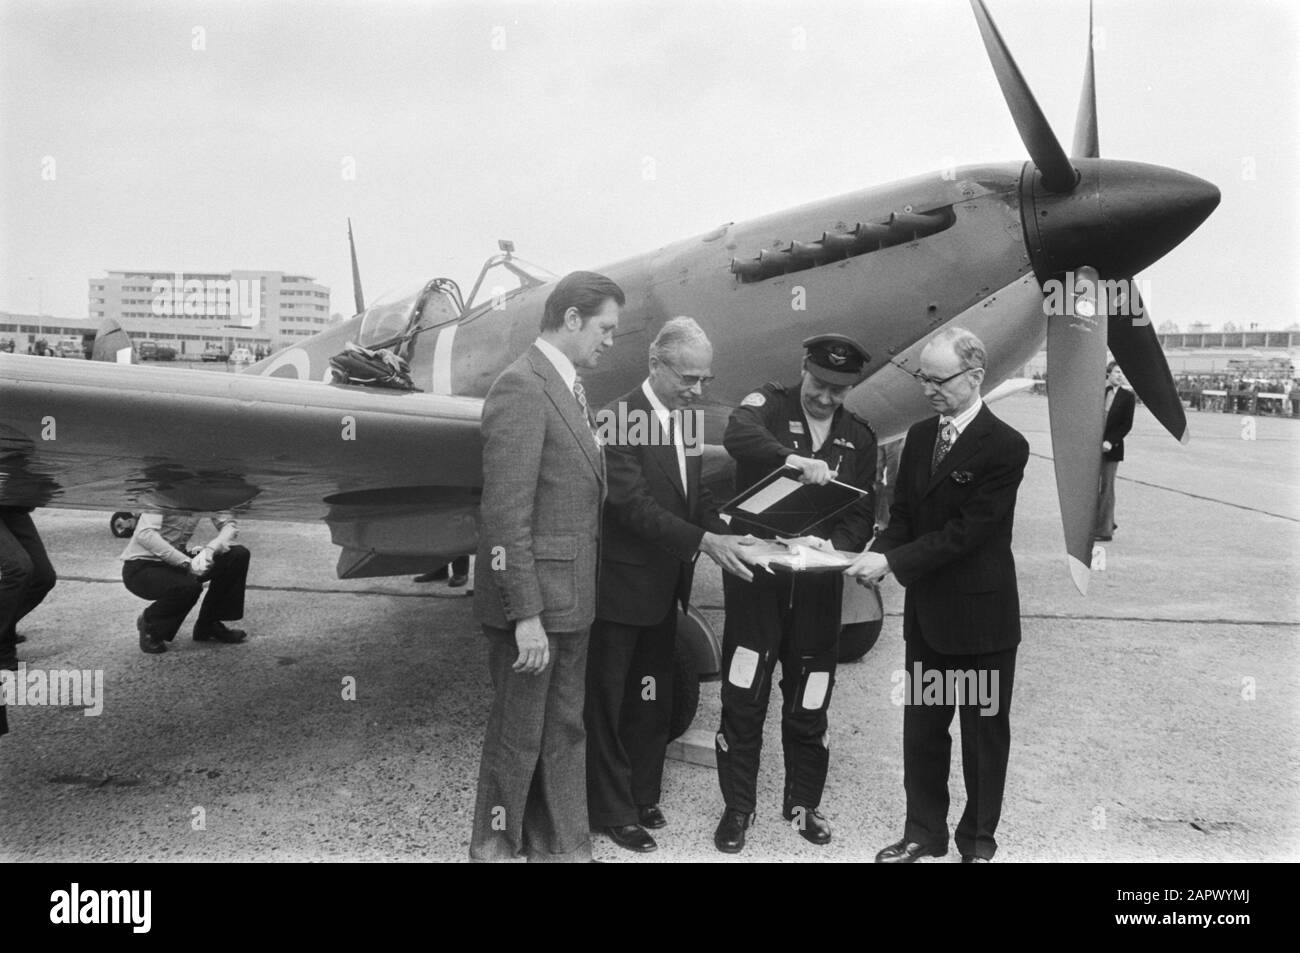 Old RAF aircraft at Schiphol; Spitfire of the Battle of Britain Memorial Flight Date: May 5, 1976 Location: Noord-Holland, Schiphol Keywords: commemorations, aviation, Second World War, aircraft Setting name: Spitfire Stock Photo